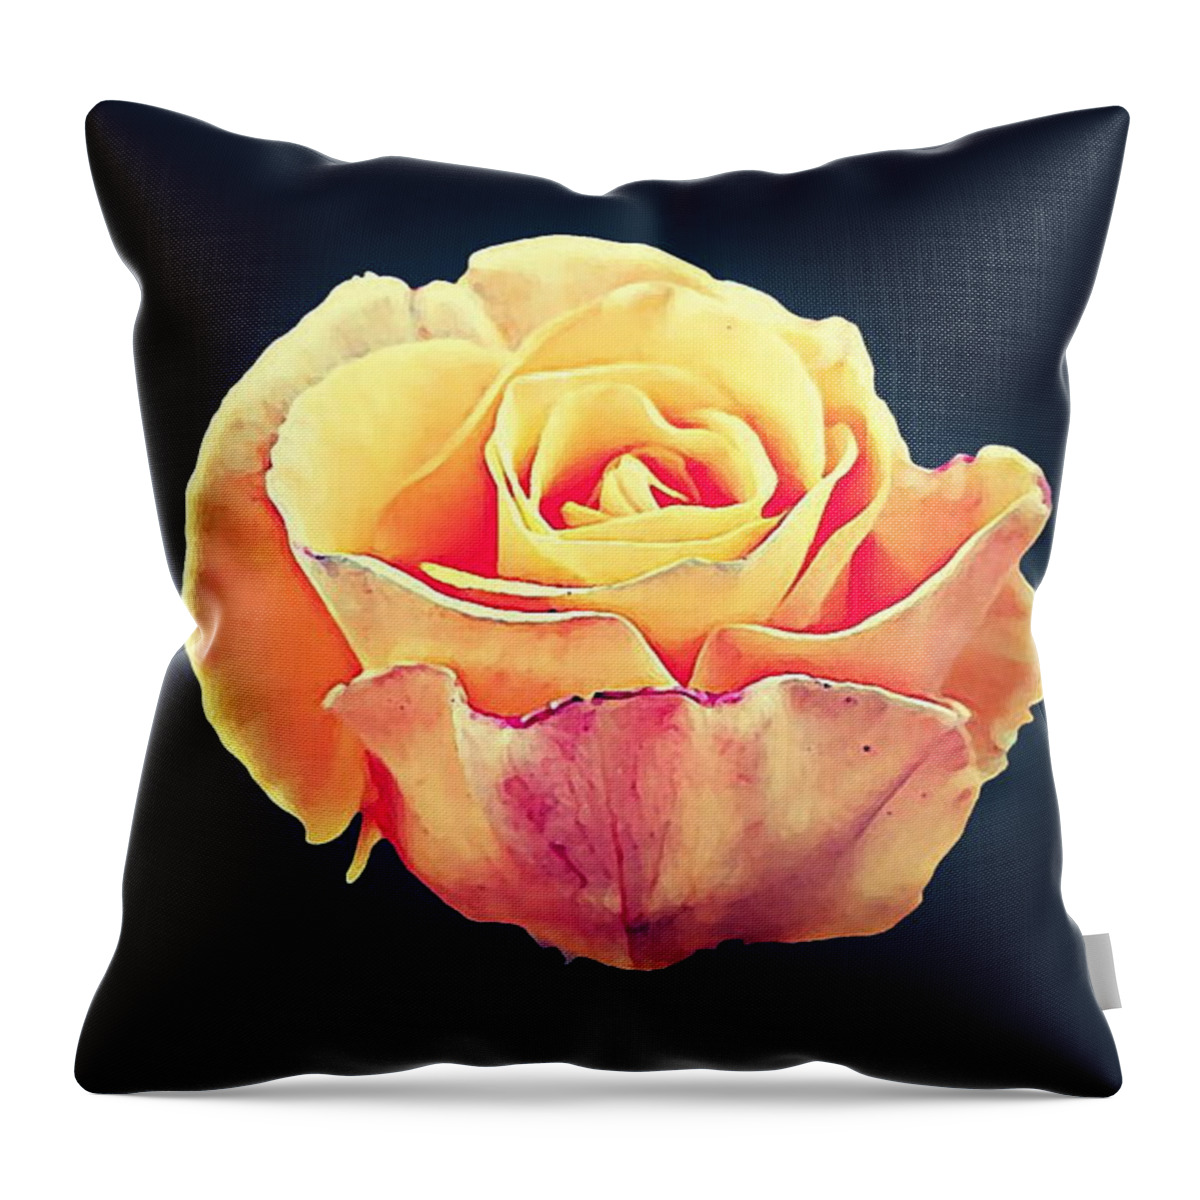 A Single Rose Throw Pillow featuring the photograph Rose Love by Tracey Lee Cassin